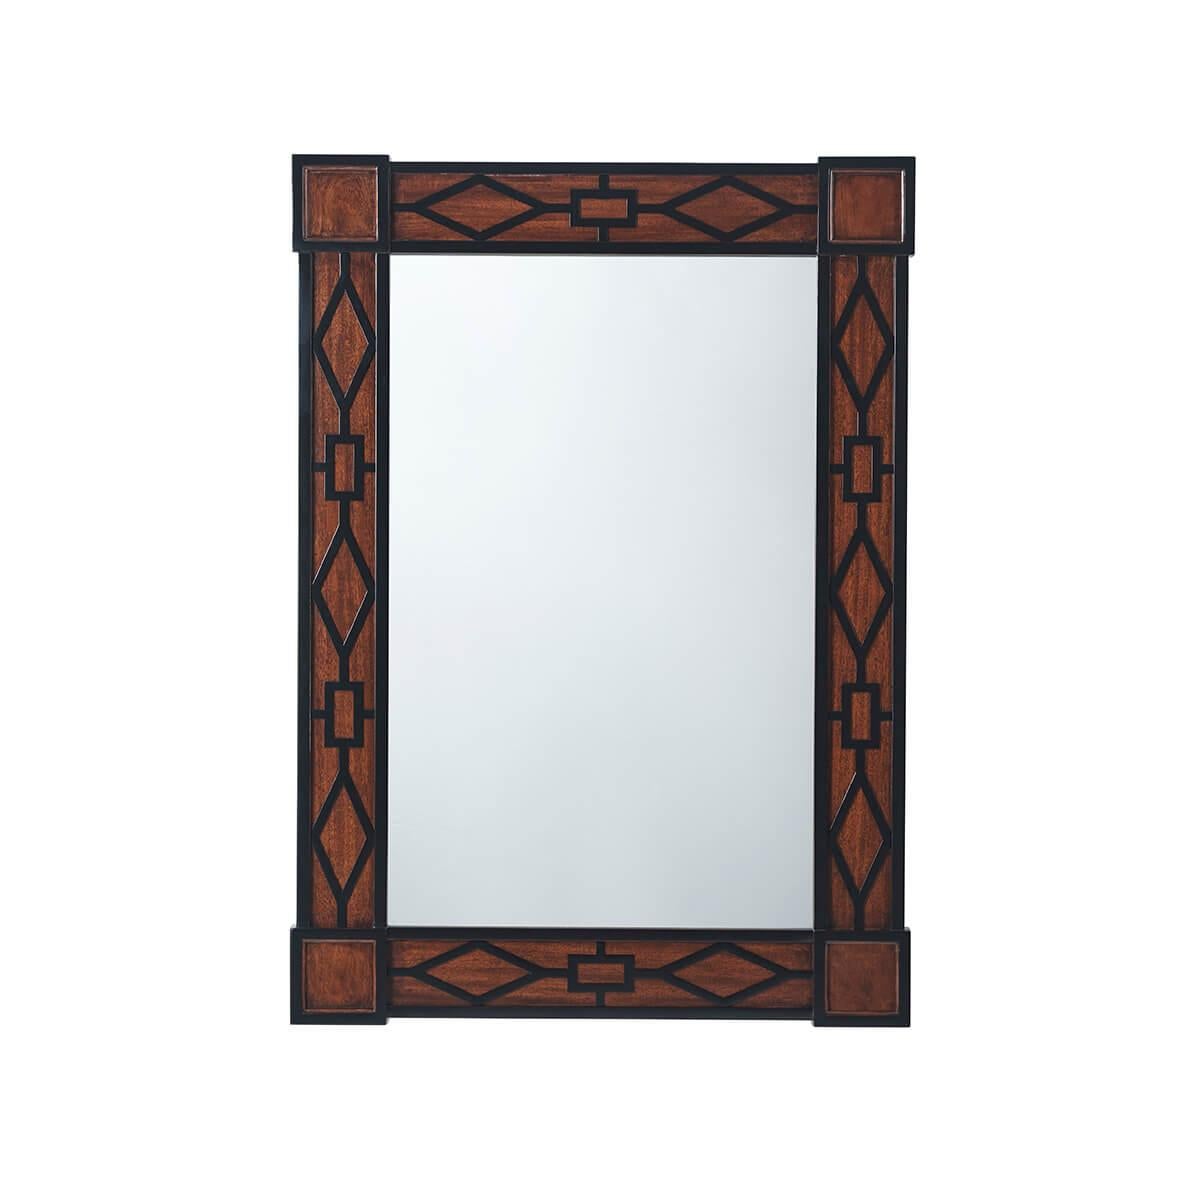 A Modern designed fretwork wall mirror that takes its timeless form from a pair of Chinese Chippendale mirrors. The rectangular mirror plate is set in a relief geometric fretwork paneled Mahogany veneered frame.

Dimensions: 32.75